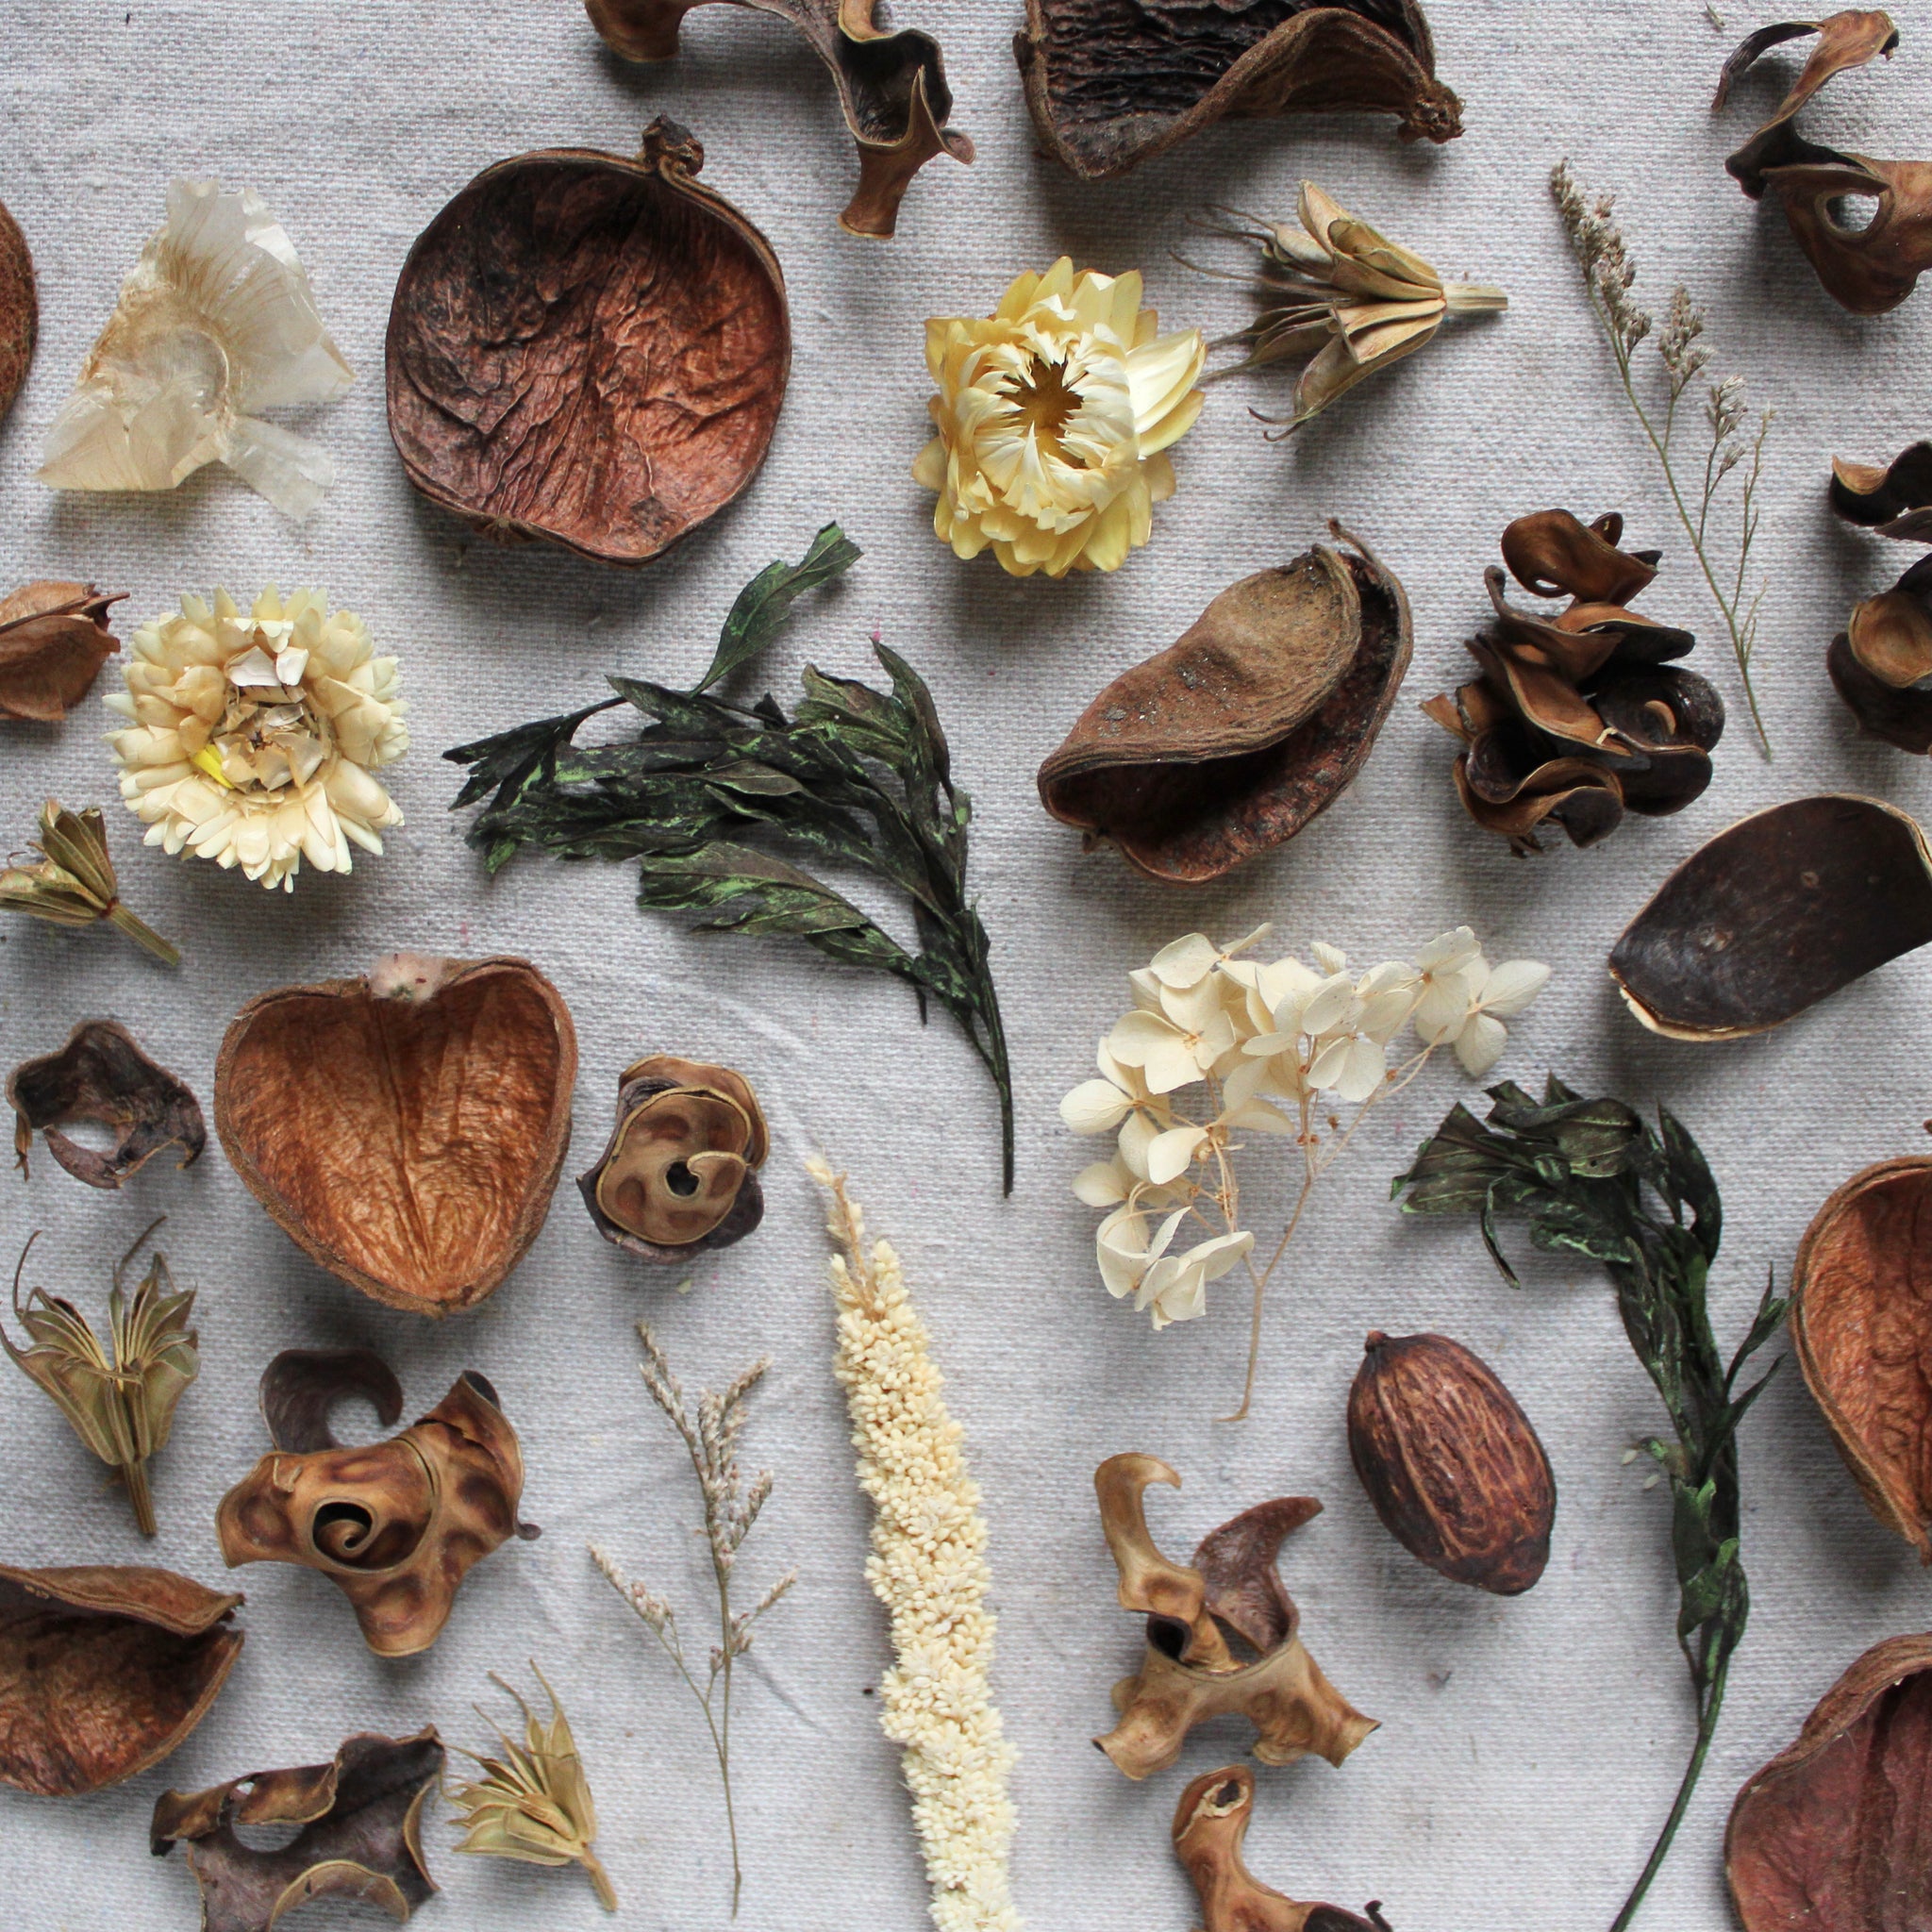 How To Dry Flowers + Make Naturally Scented Potpourri